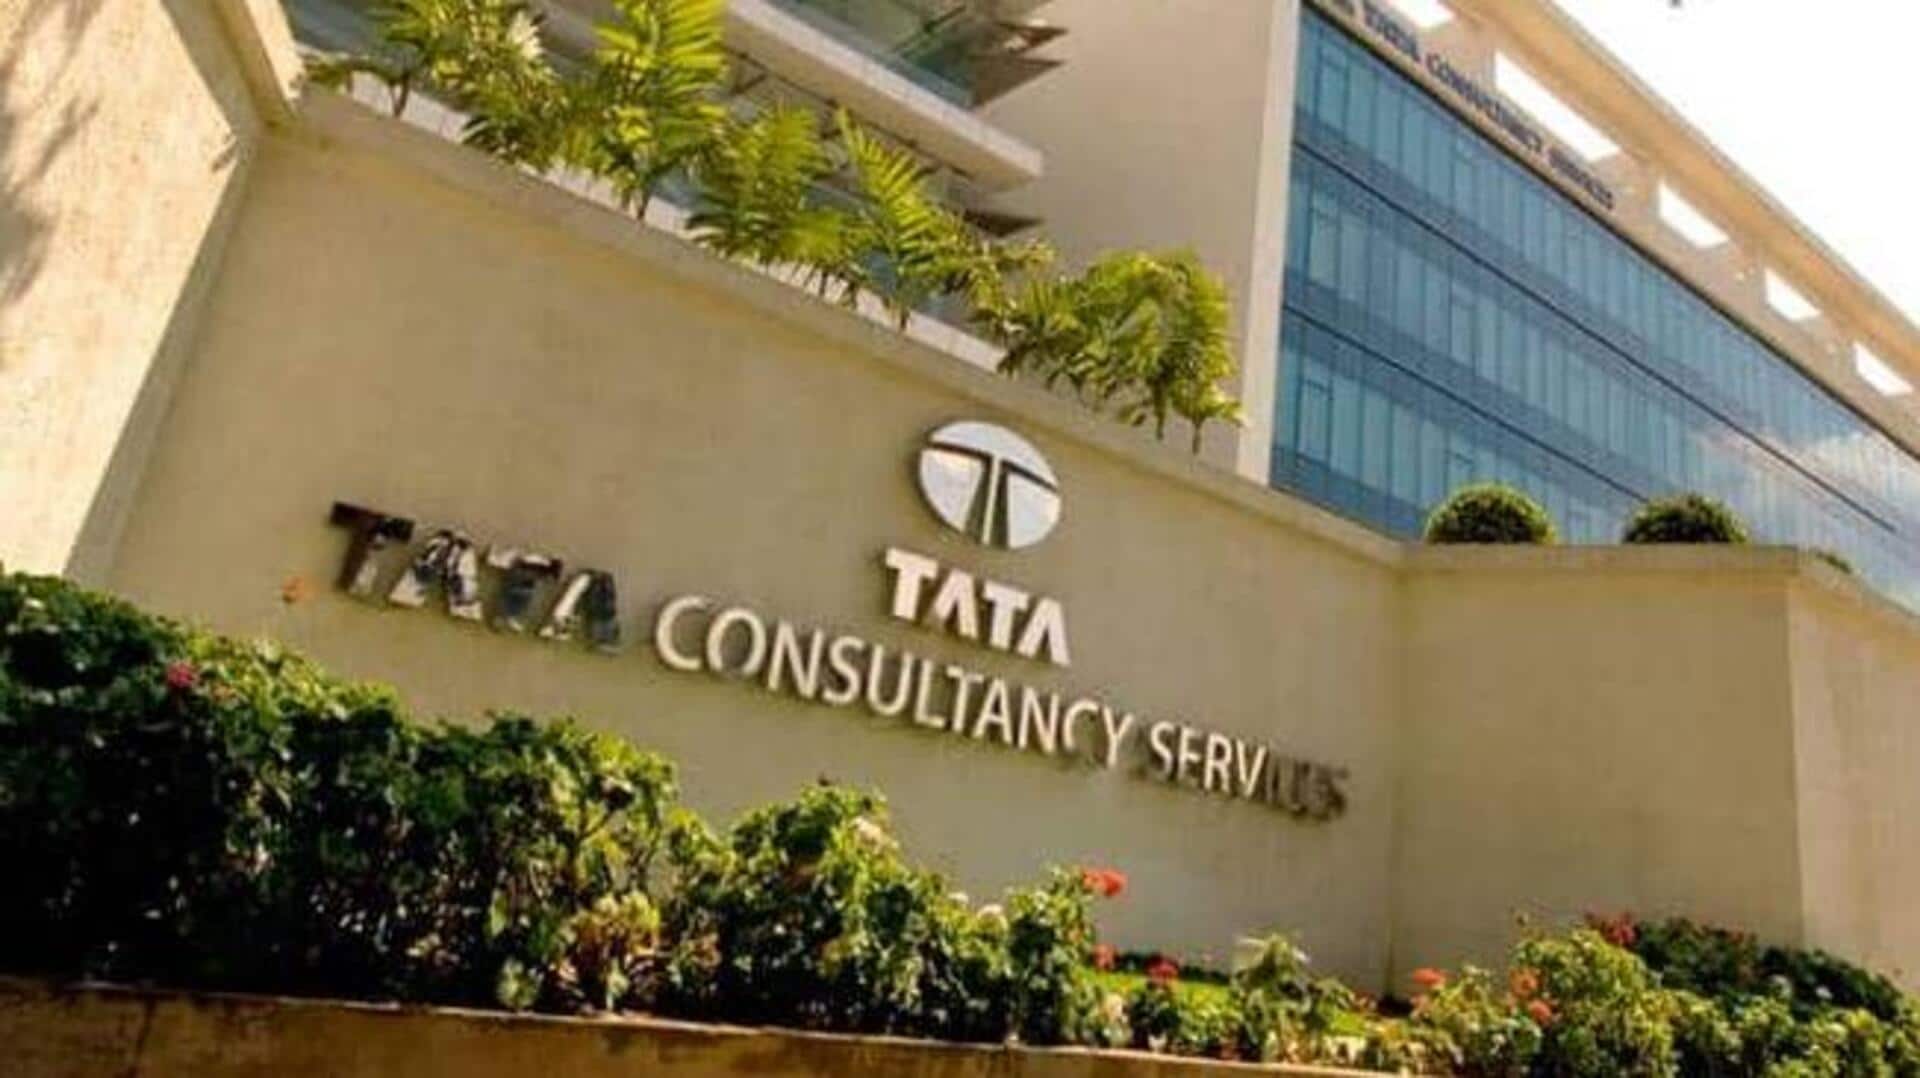 TCS has to pay DXC $210 million: What's the story? 